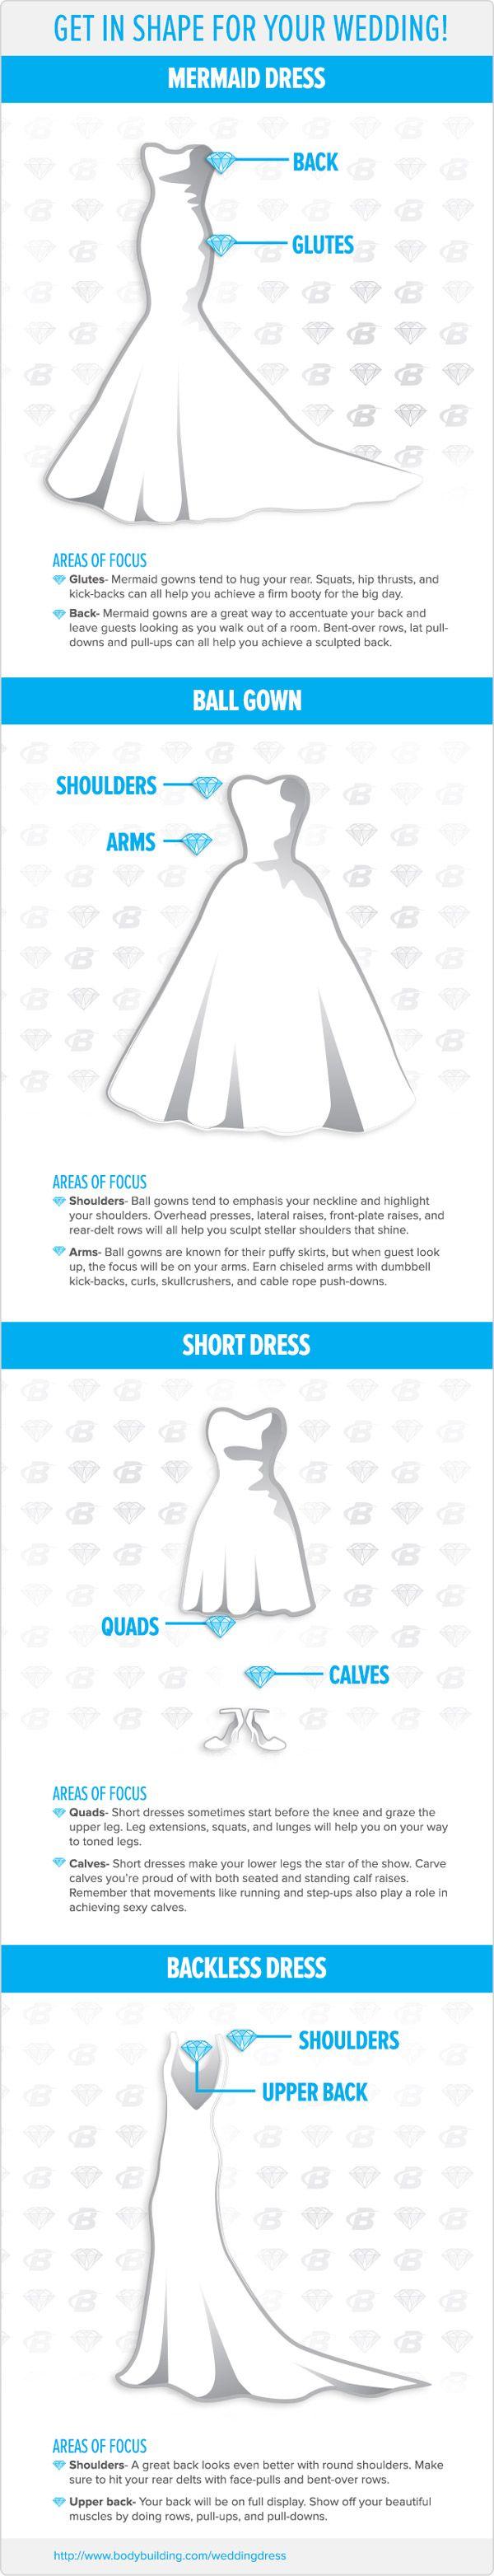 Hochzeit - Buff Bride: How To Get In Shape For Your Wedding